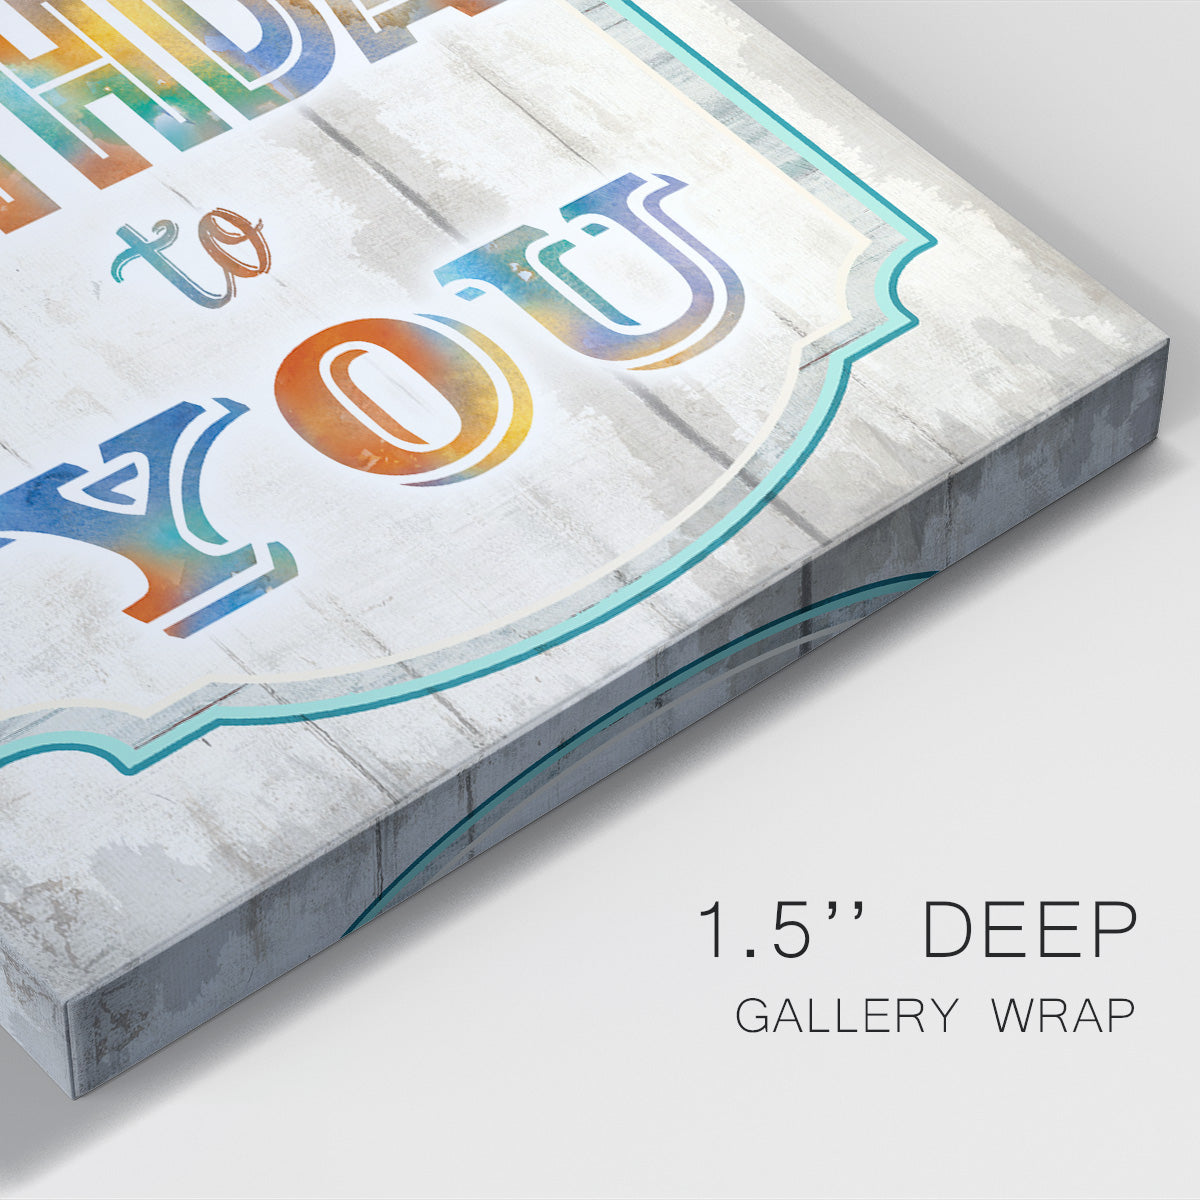 Happy Birthday to You Premium Gallery Wrapped Canvas - Ready to Hang